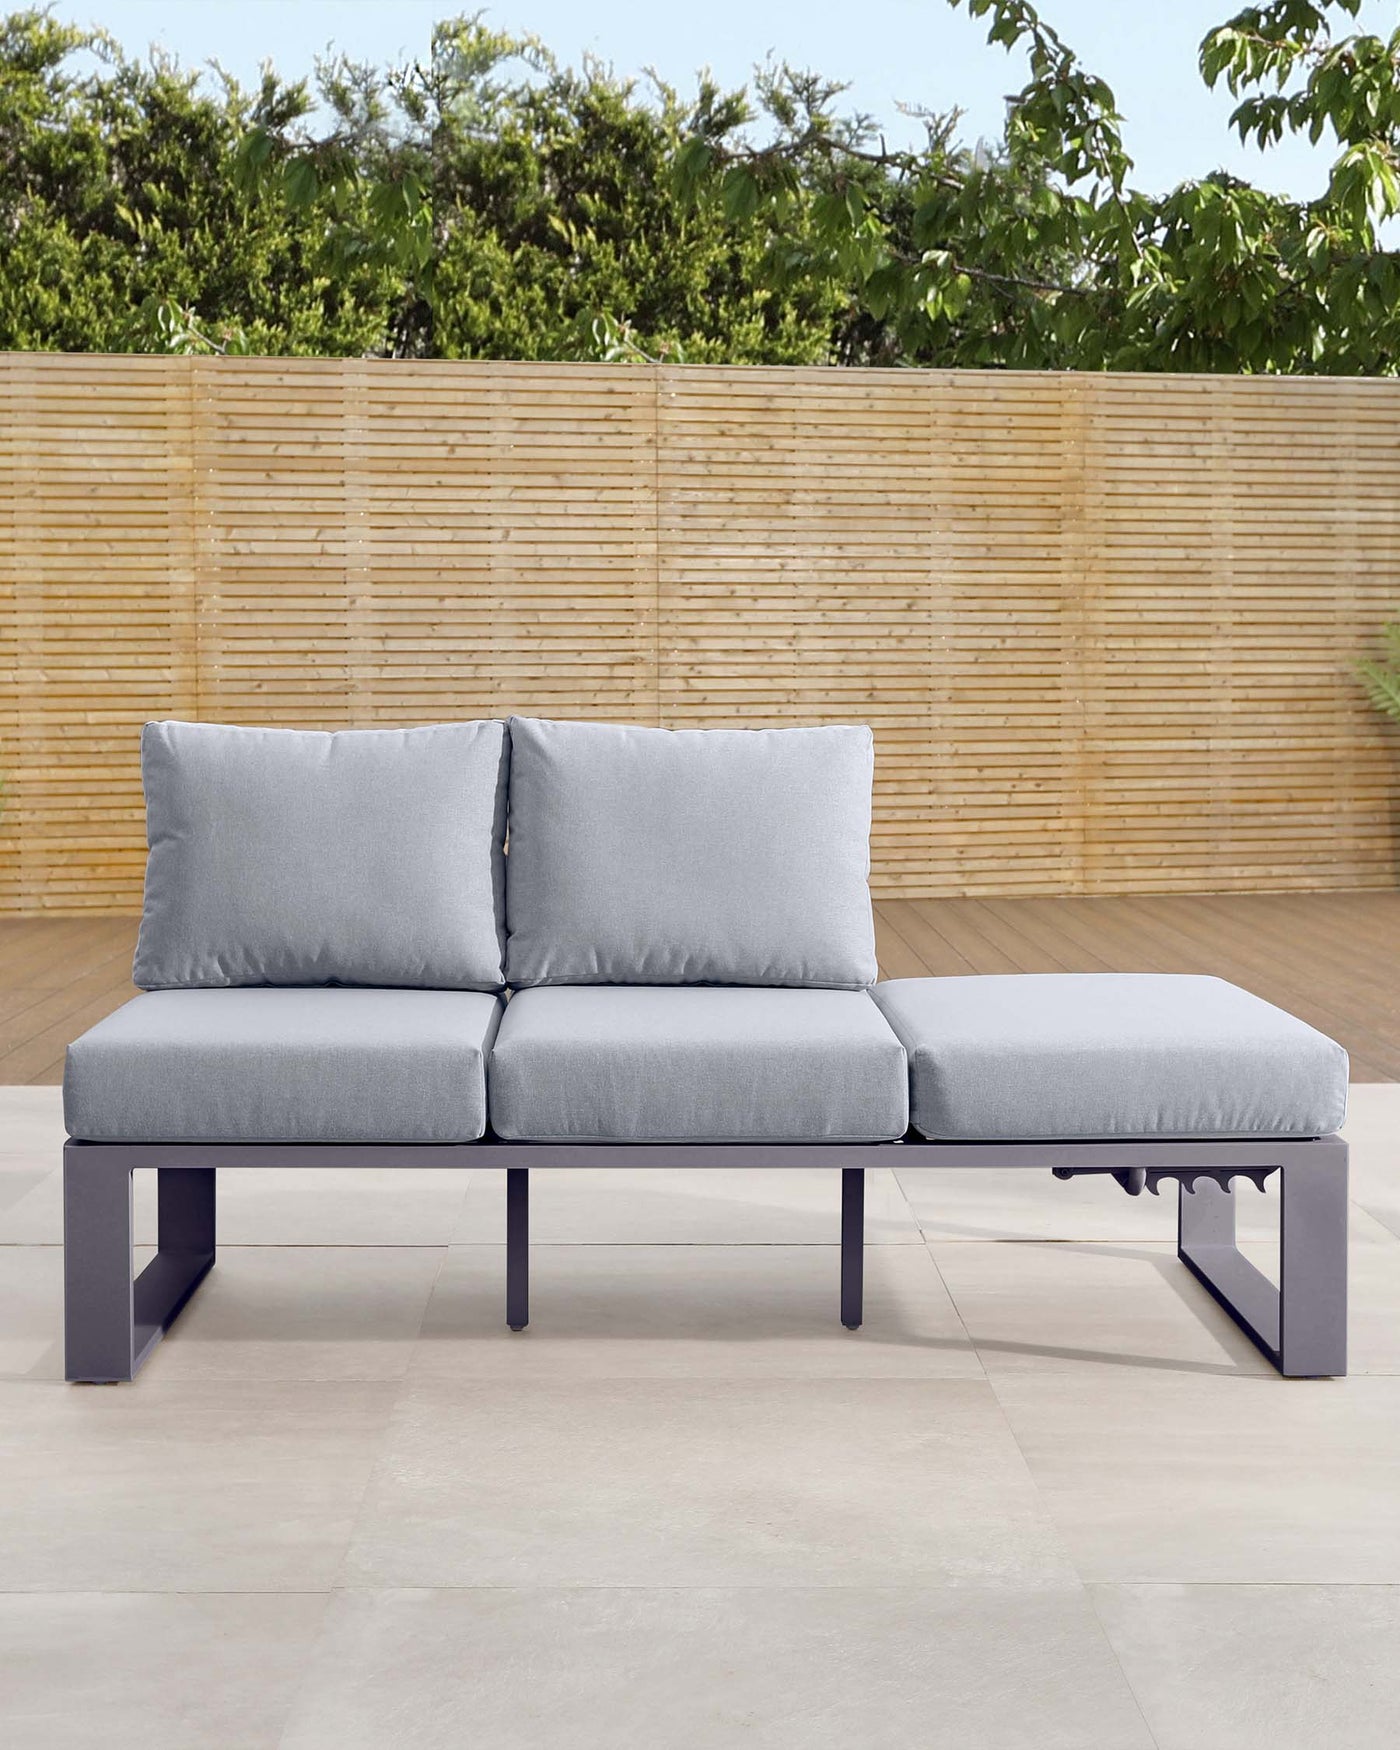 Modern outdoor sectional sofa with grey upholstery and a matching chaise lounge, featuring a sleek dark metal frame, placed on a patio with a bamboo fence background.